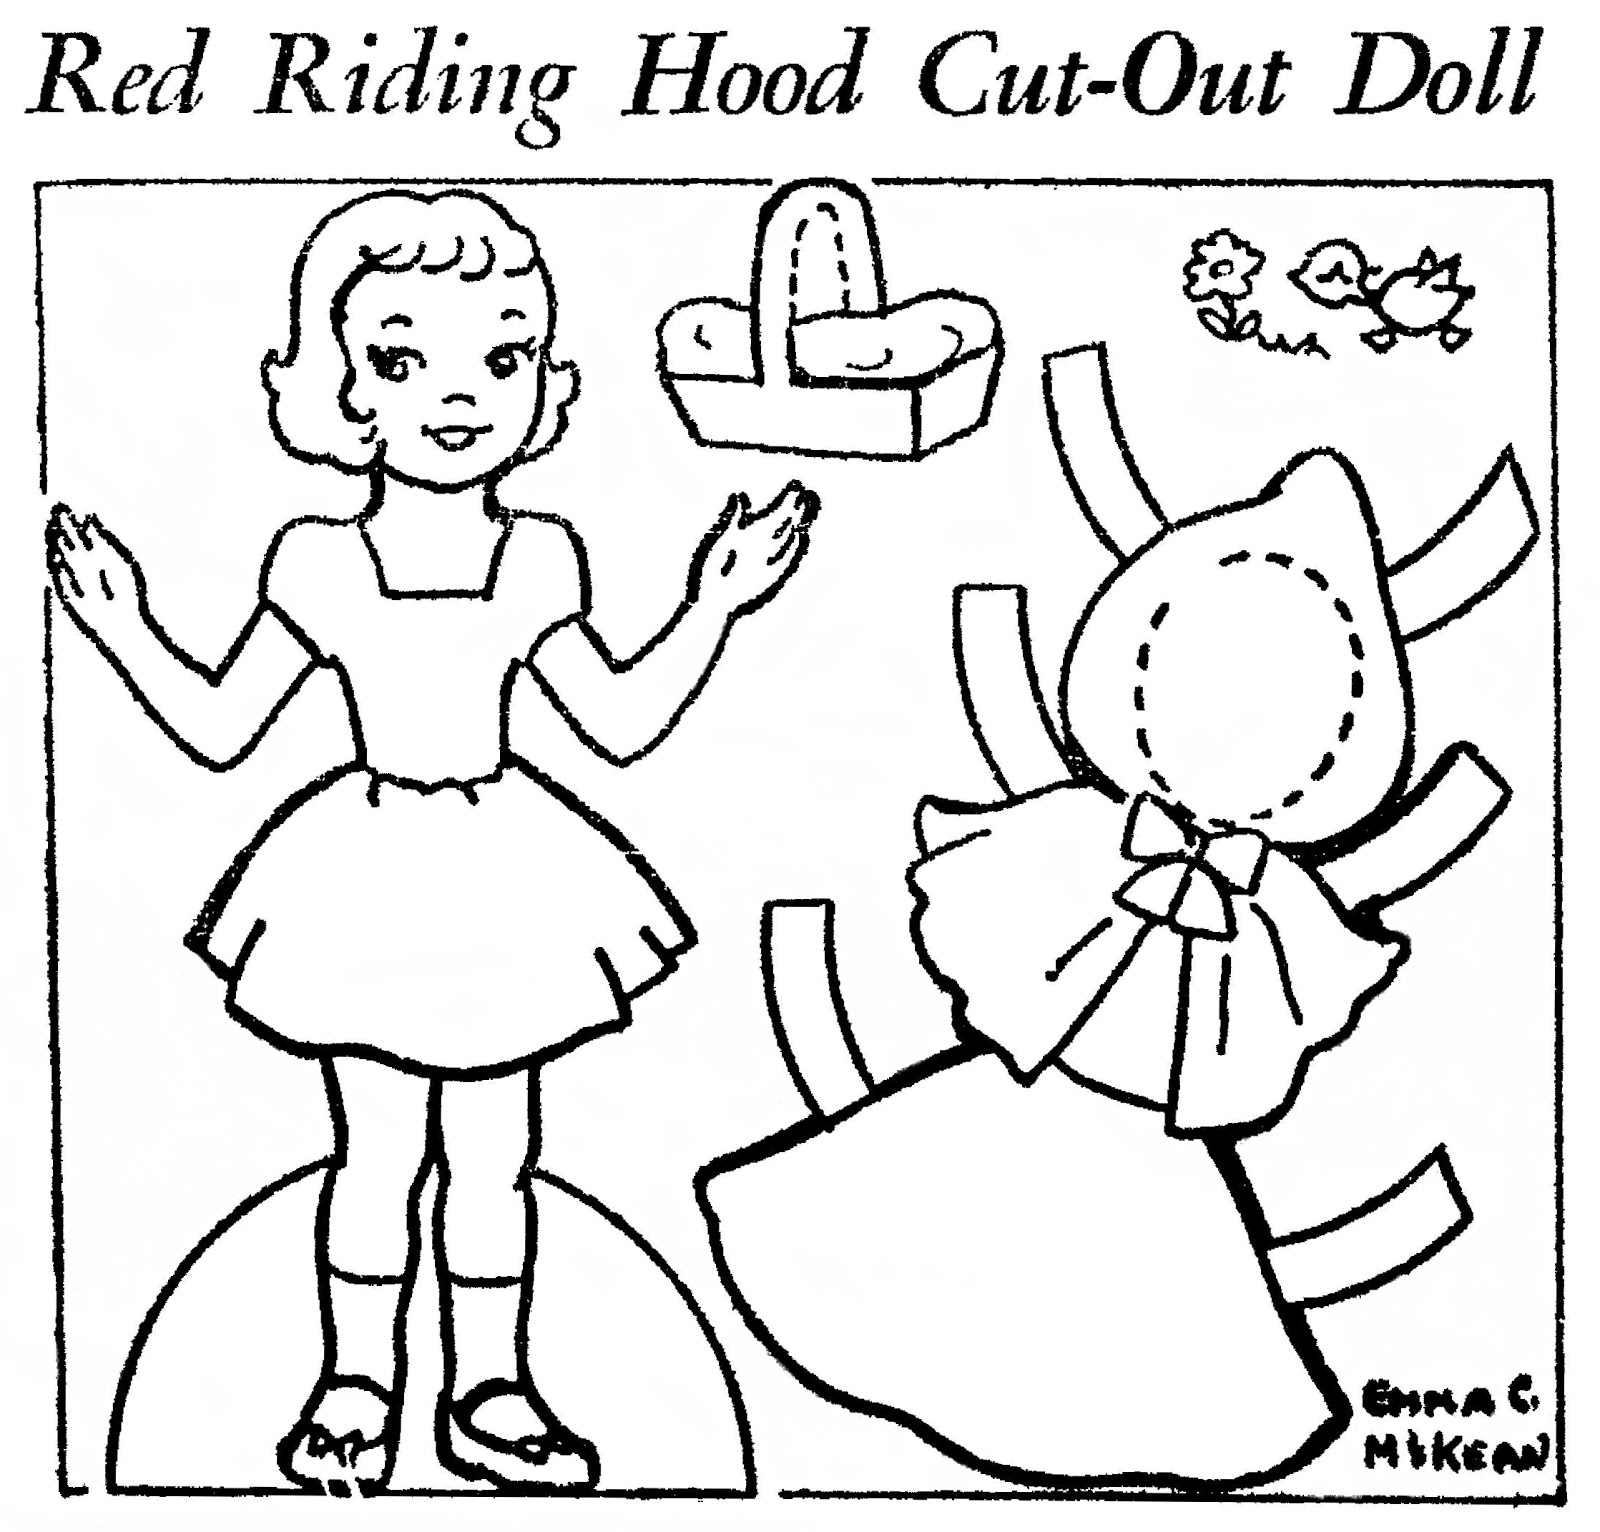 Little red riding hood cut-out doll template